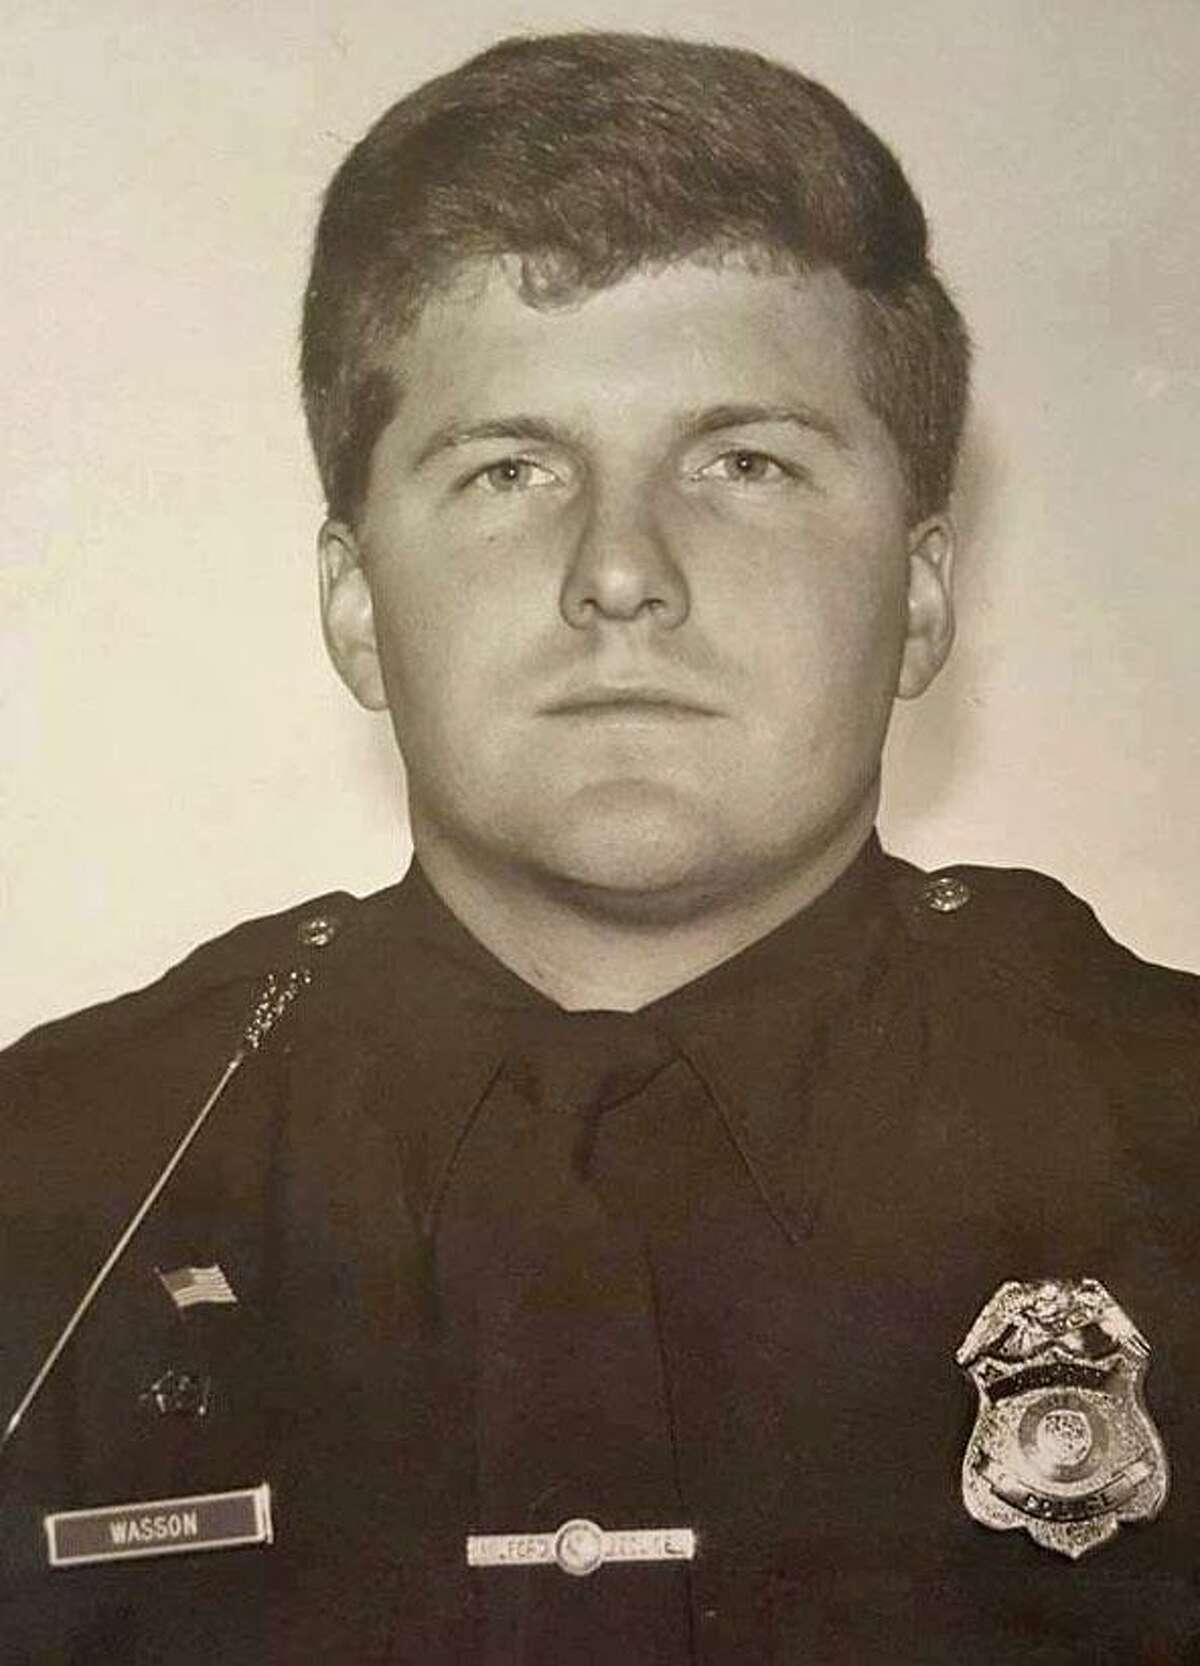 It’s been 30 years ago this week when Milford Police Officer Daniel Wasson was killed in the line of duty. Wasson, then 25, was shot while making a routine motor-vehicle stop on the Boston Post Road on Sunday, April 12, 1987. Thomas Hoyeson, the driver stopped by Wasson, shot and killed the young officer. He was sentenced to life in prison.